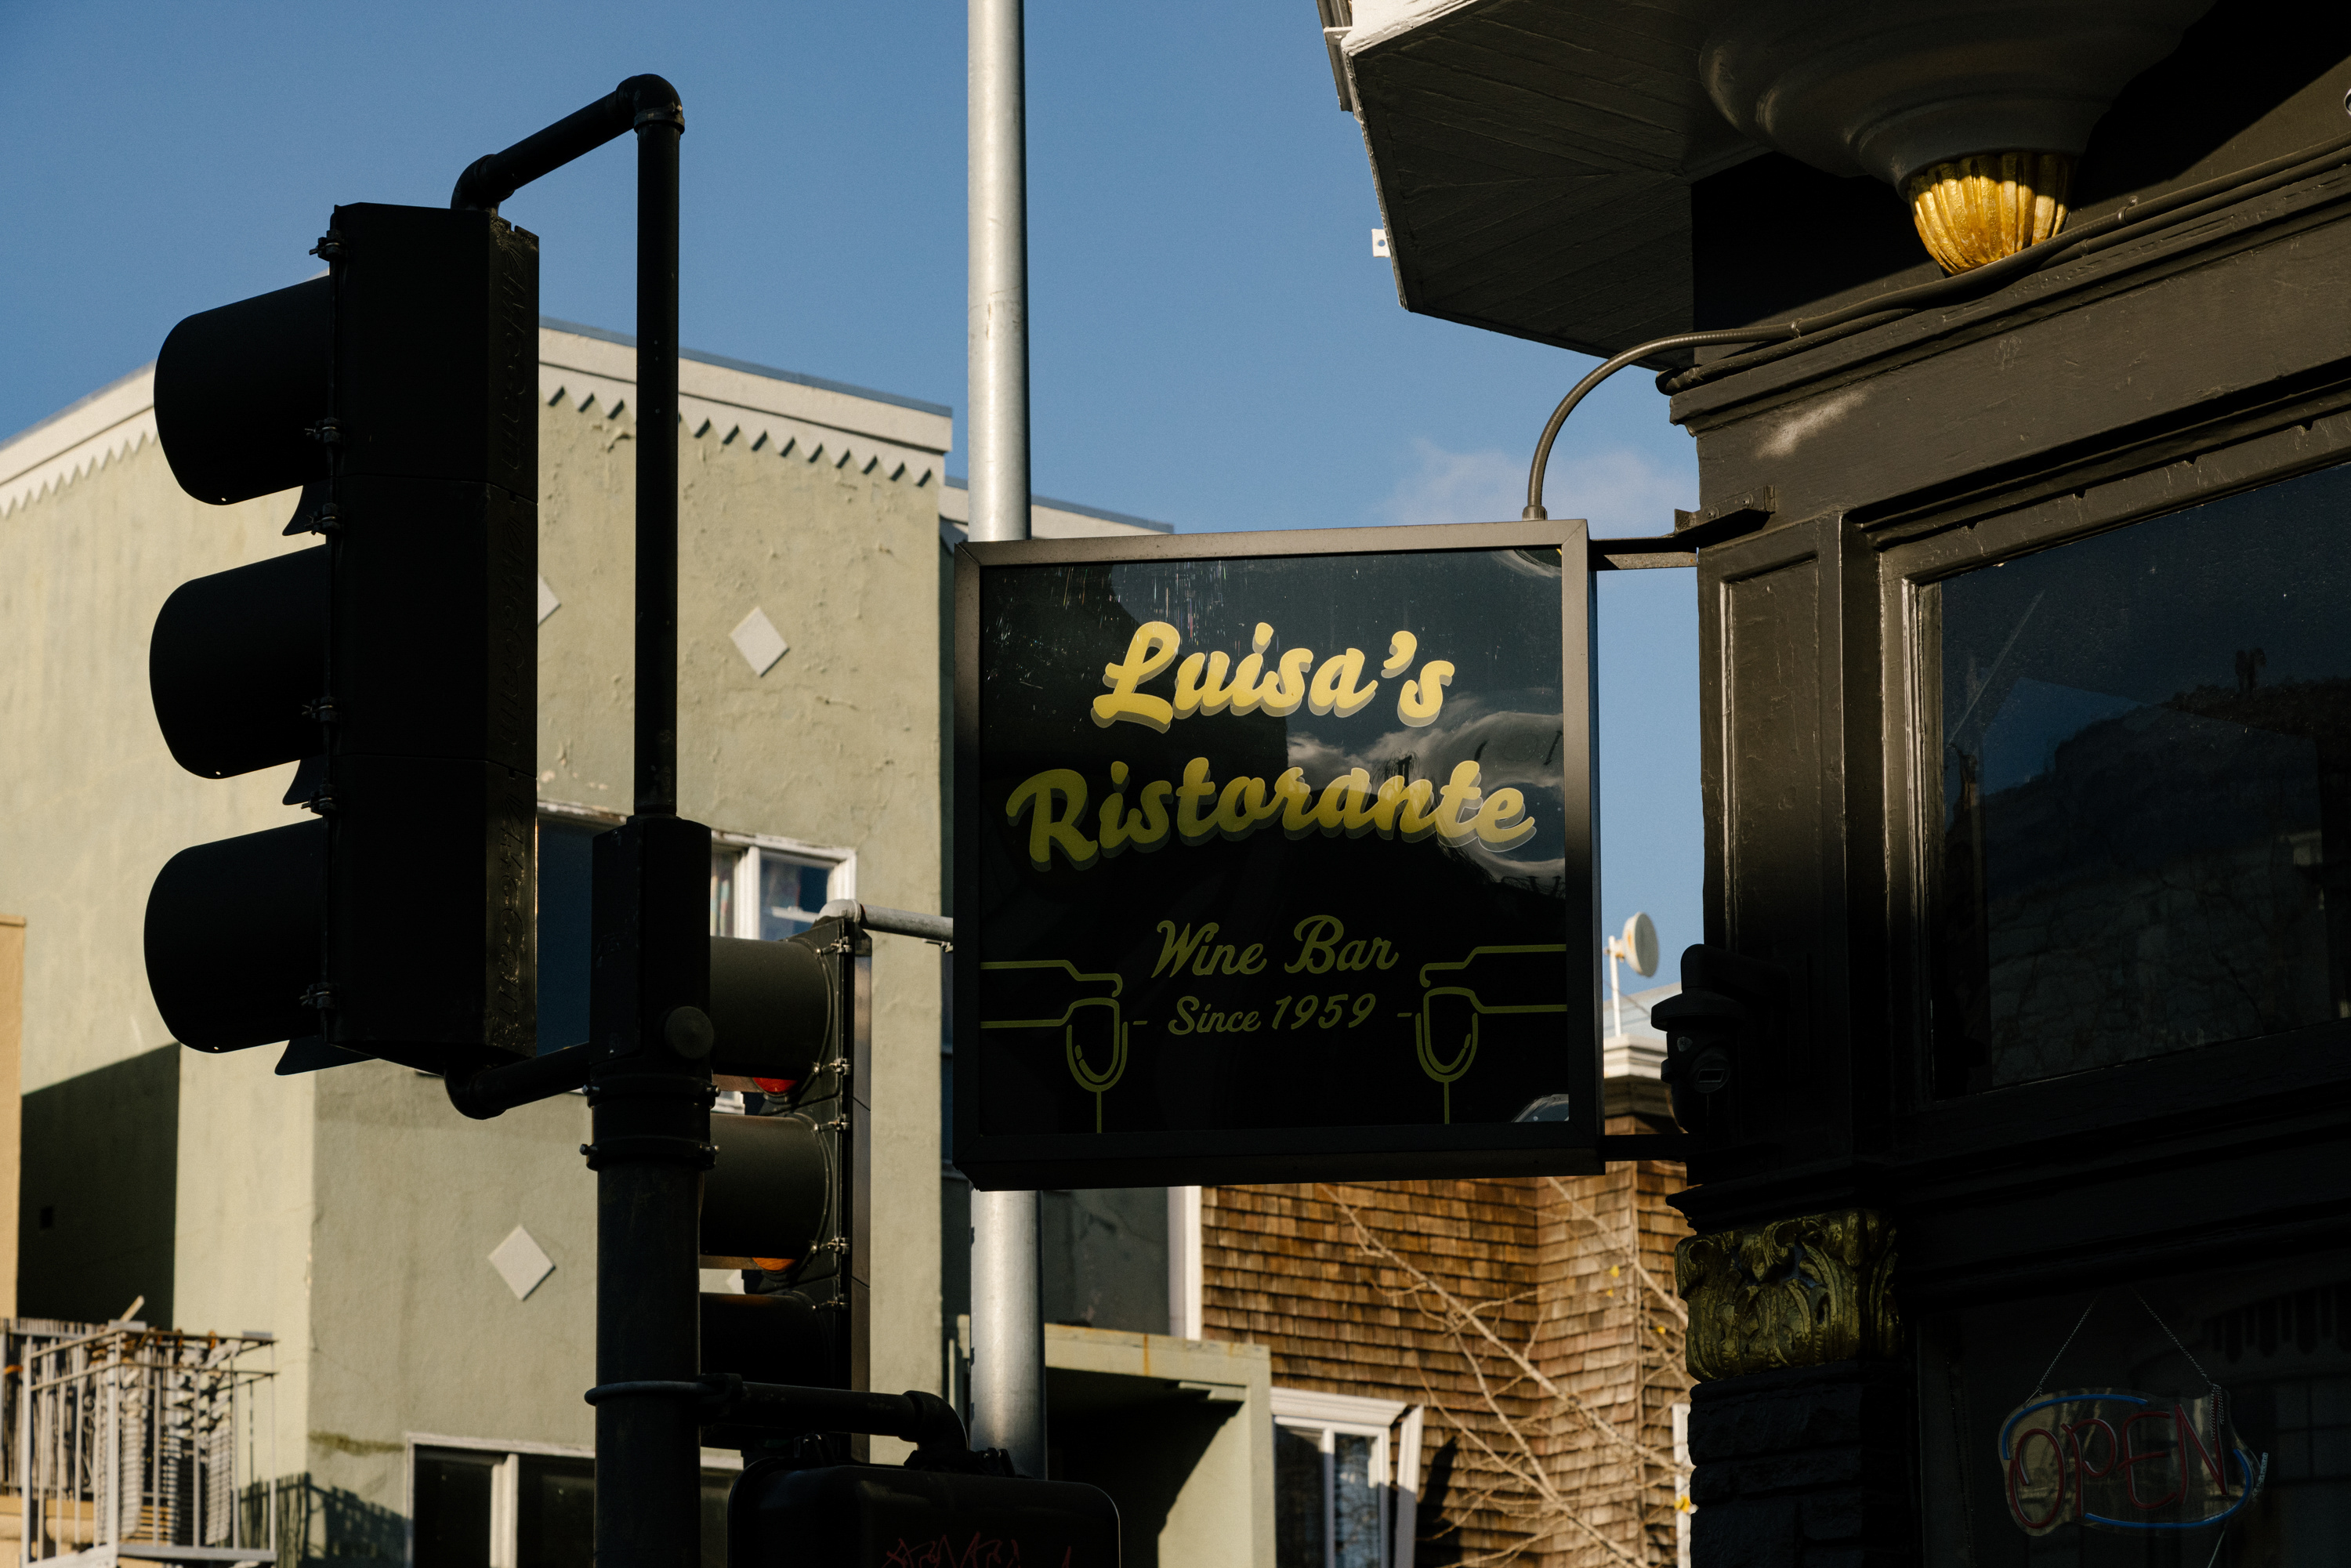 A sign reading &quot;Luisa's Ristorante Wine Bar Since 1959&quot; beside a traffic light, with building and sky in the background.